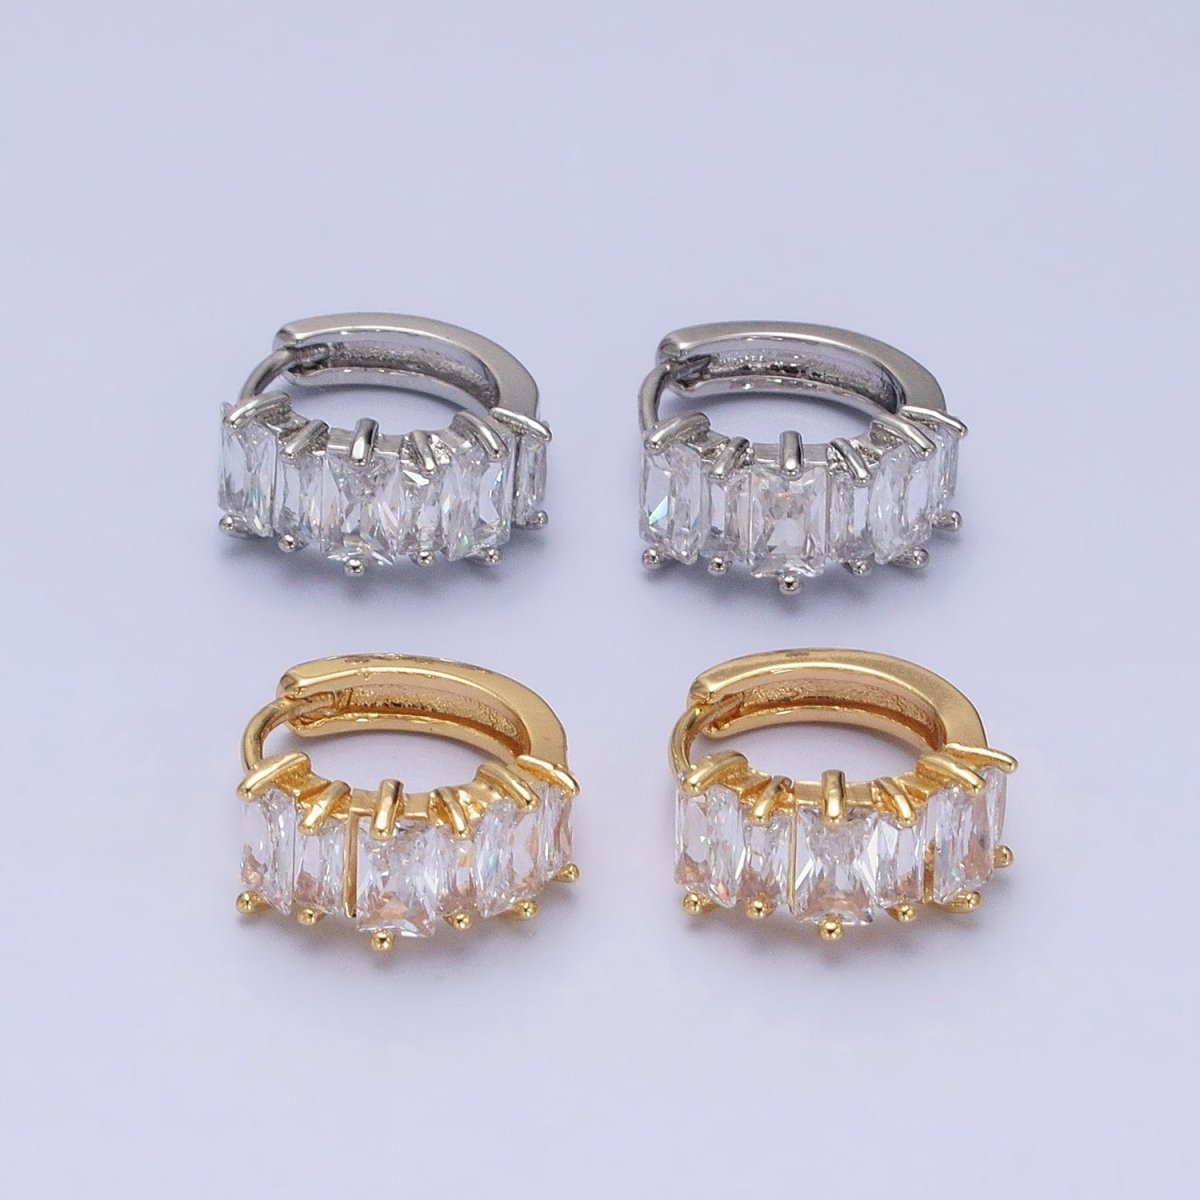 16K Gold Filled Clear Baguette Lined 13mm Huggie Earrings in Gold & Silver | AD845 AD846 - DLUXCA